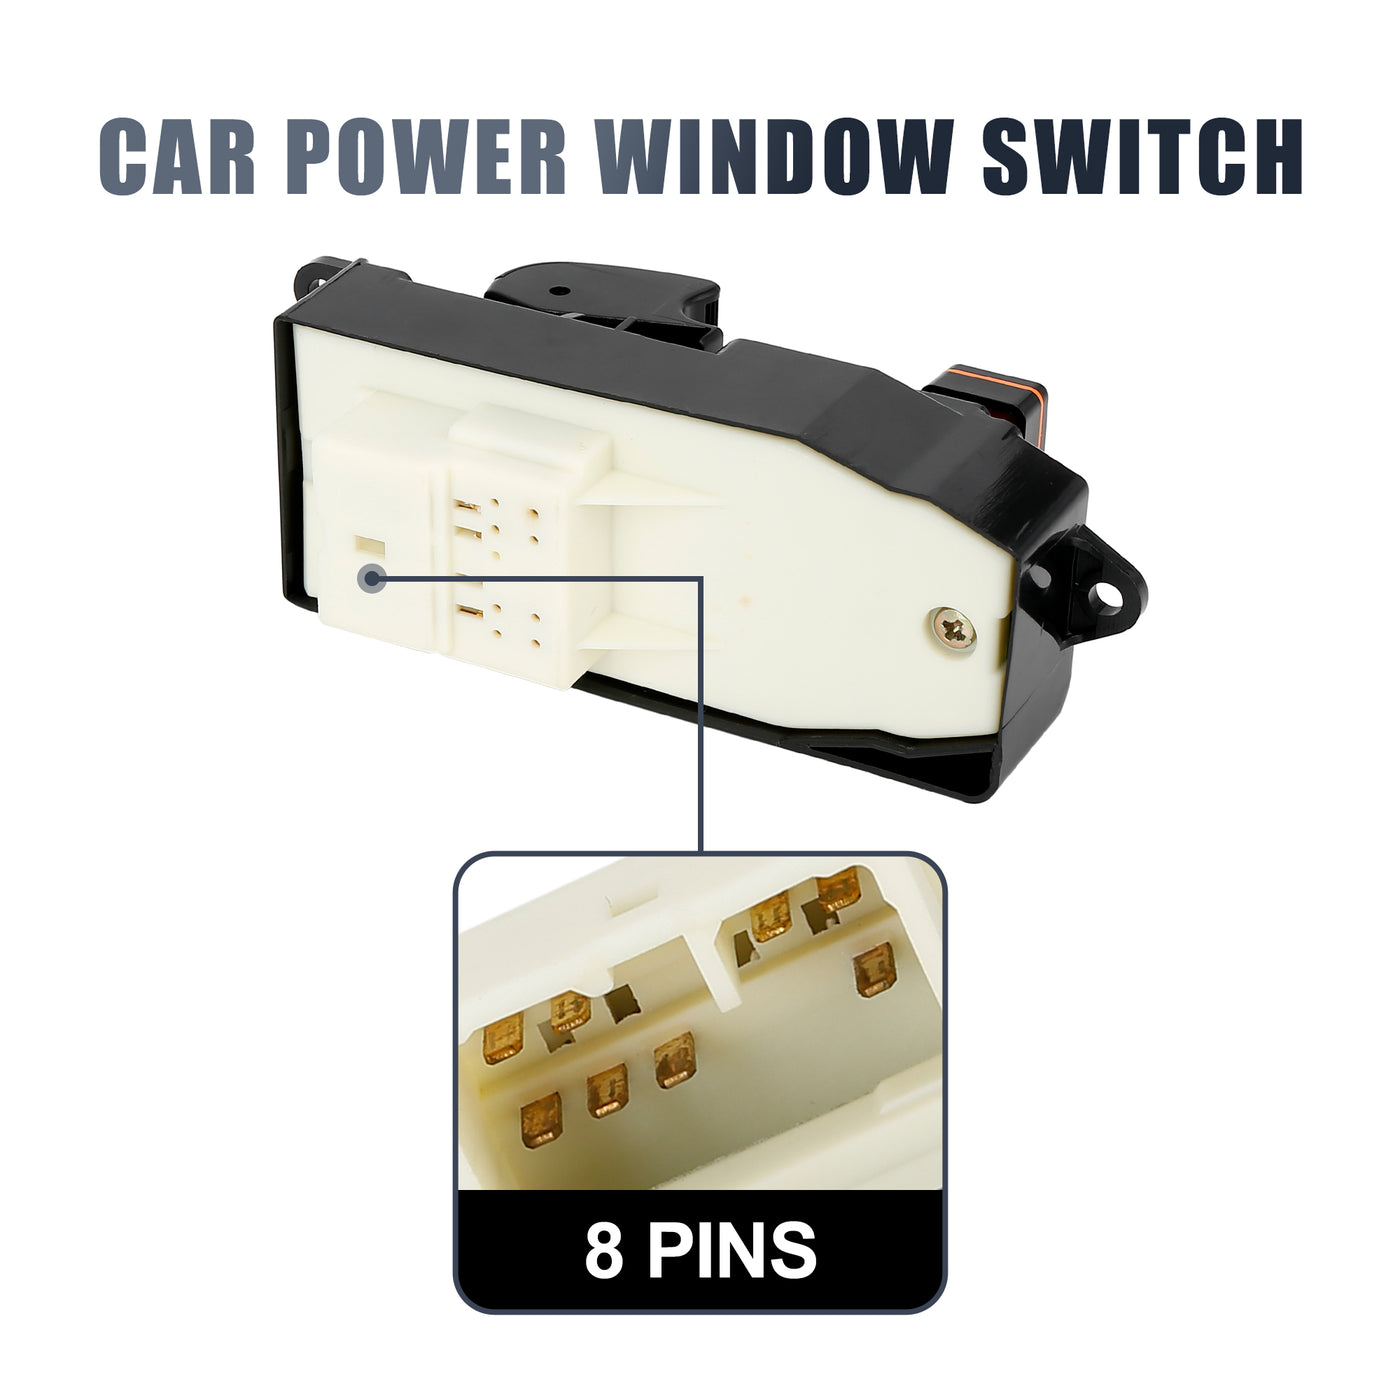 X AUTOHAUX Master Driver Side Power Window Switch 84820-35100 Replacement for Toyota FJ Cruiser 2007-2012